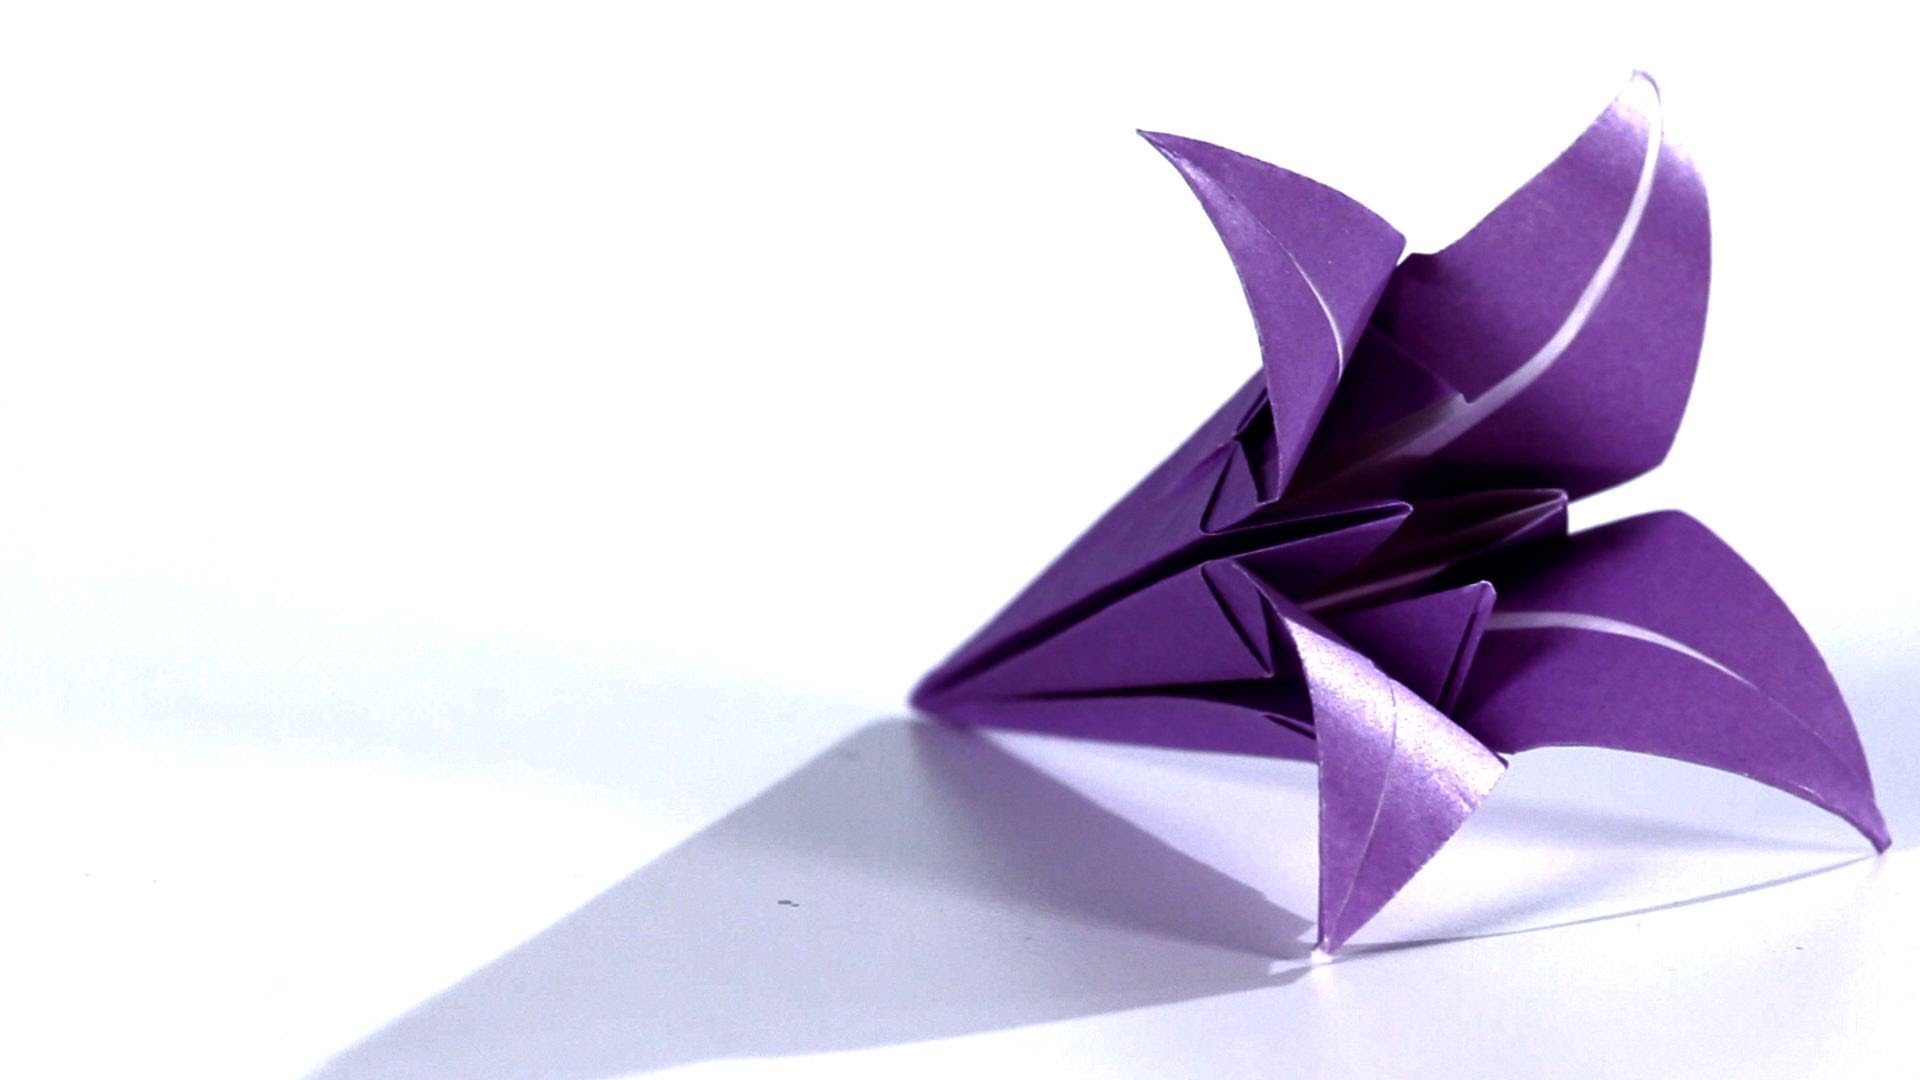 How to Make a Lily | Origami - YouTube